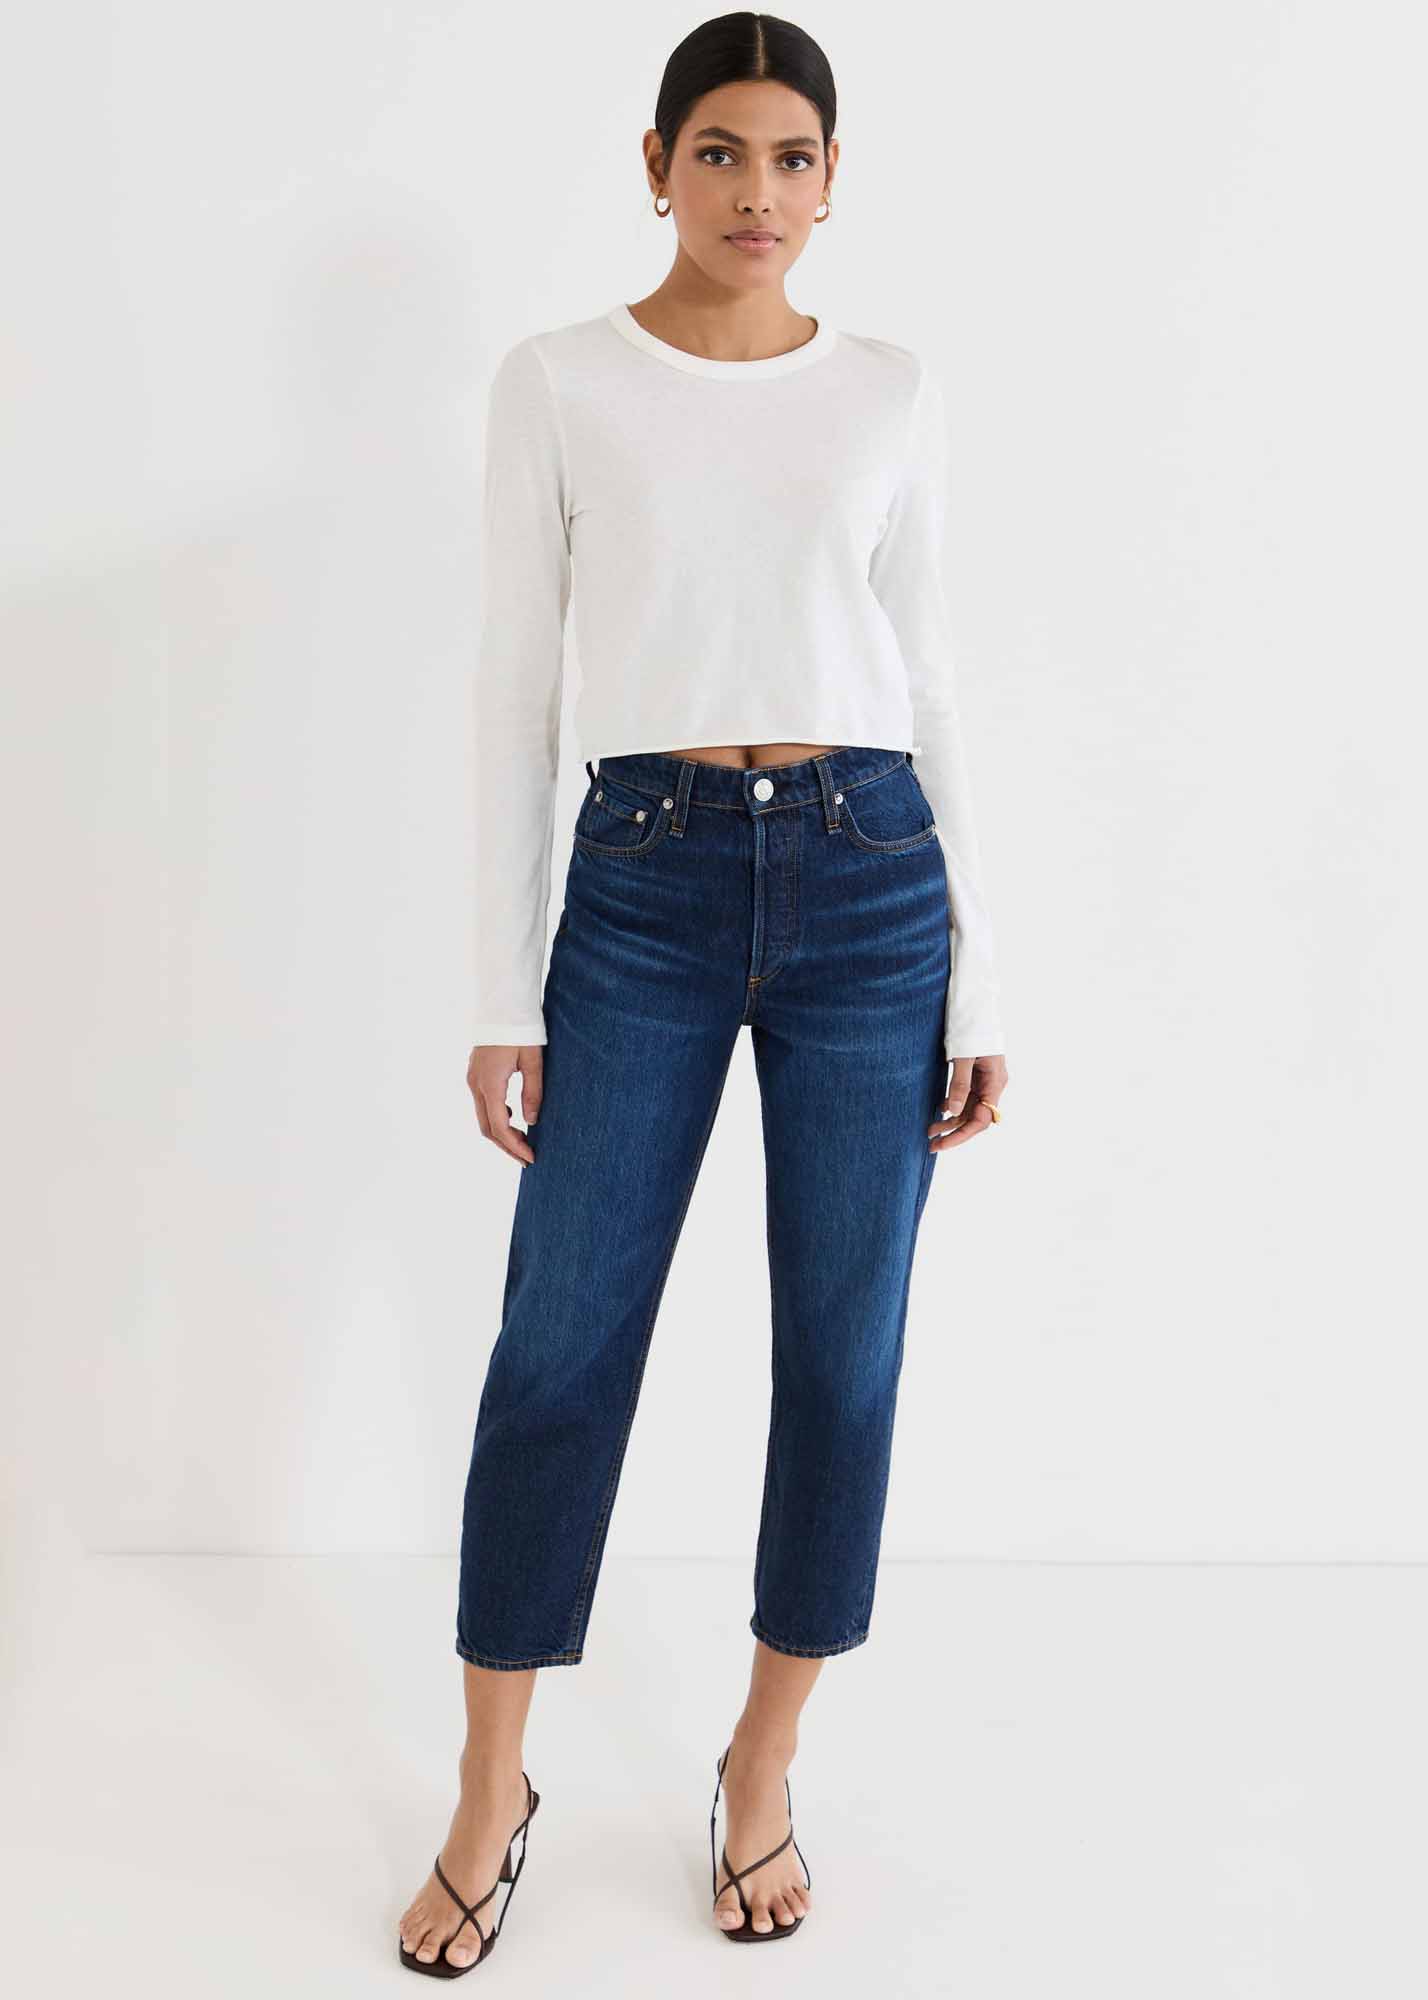 R&B Alissa Jeans in Clementine